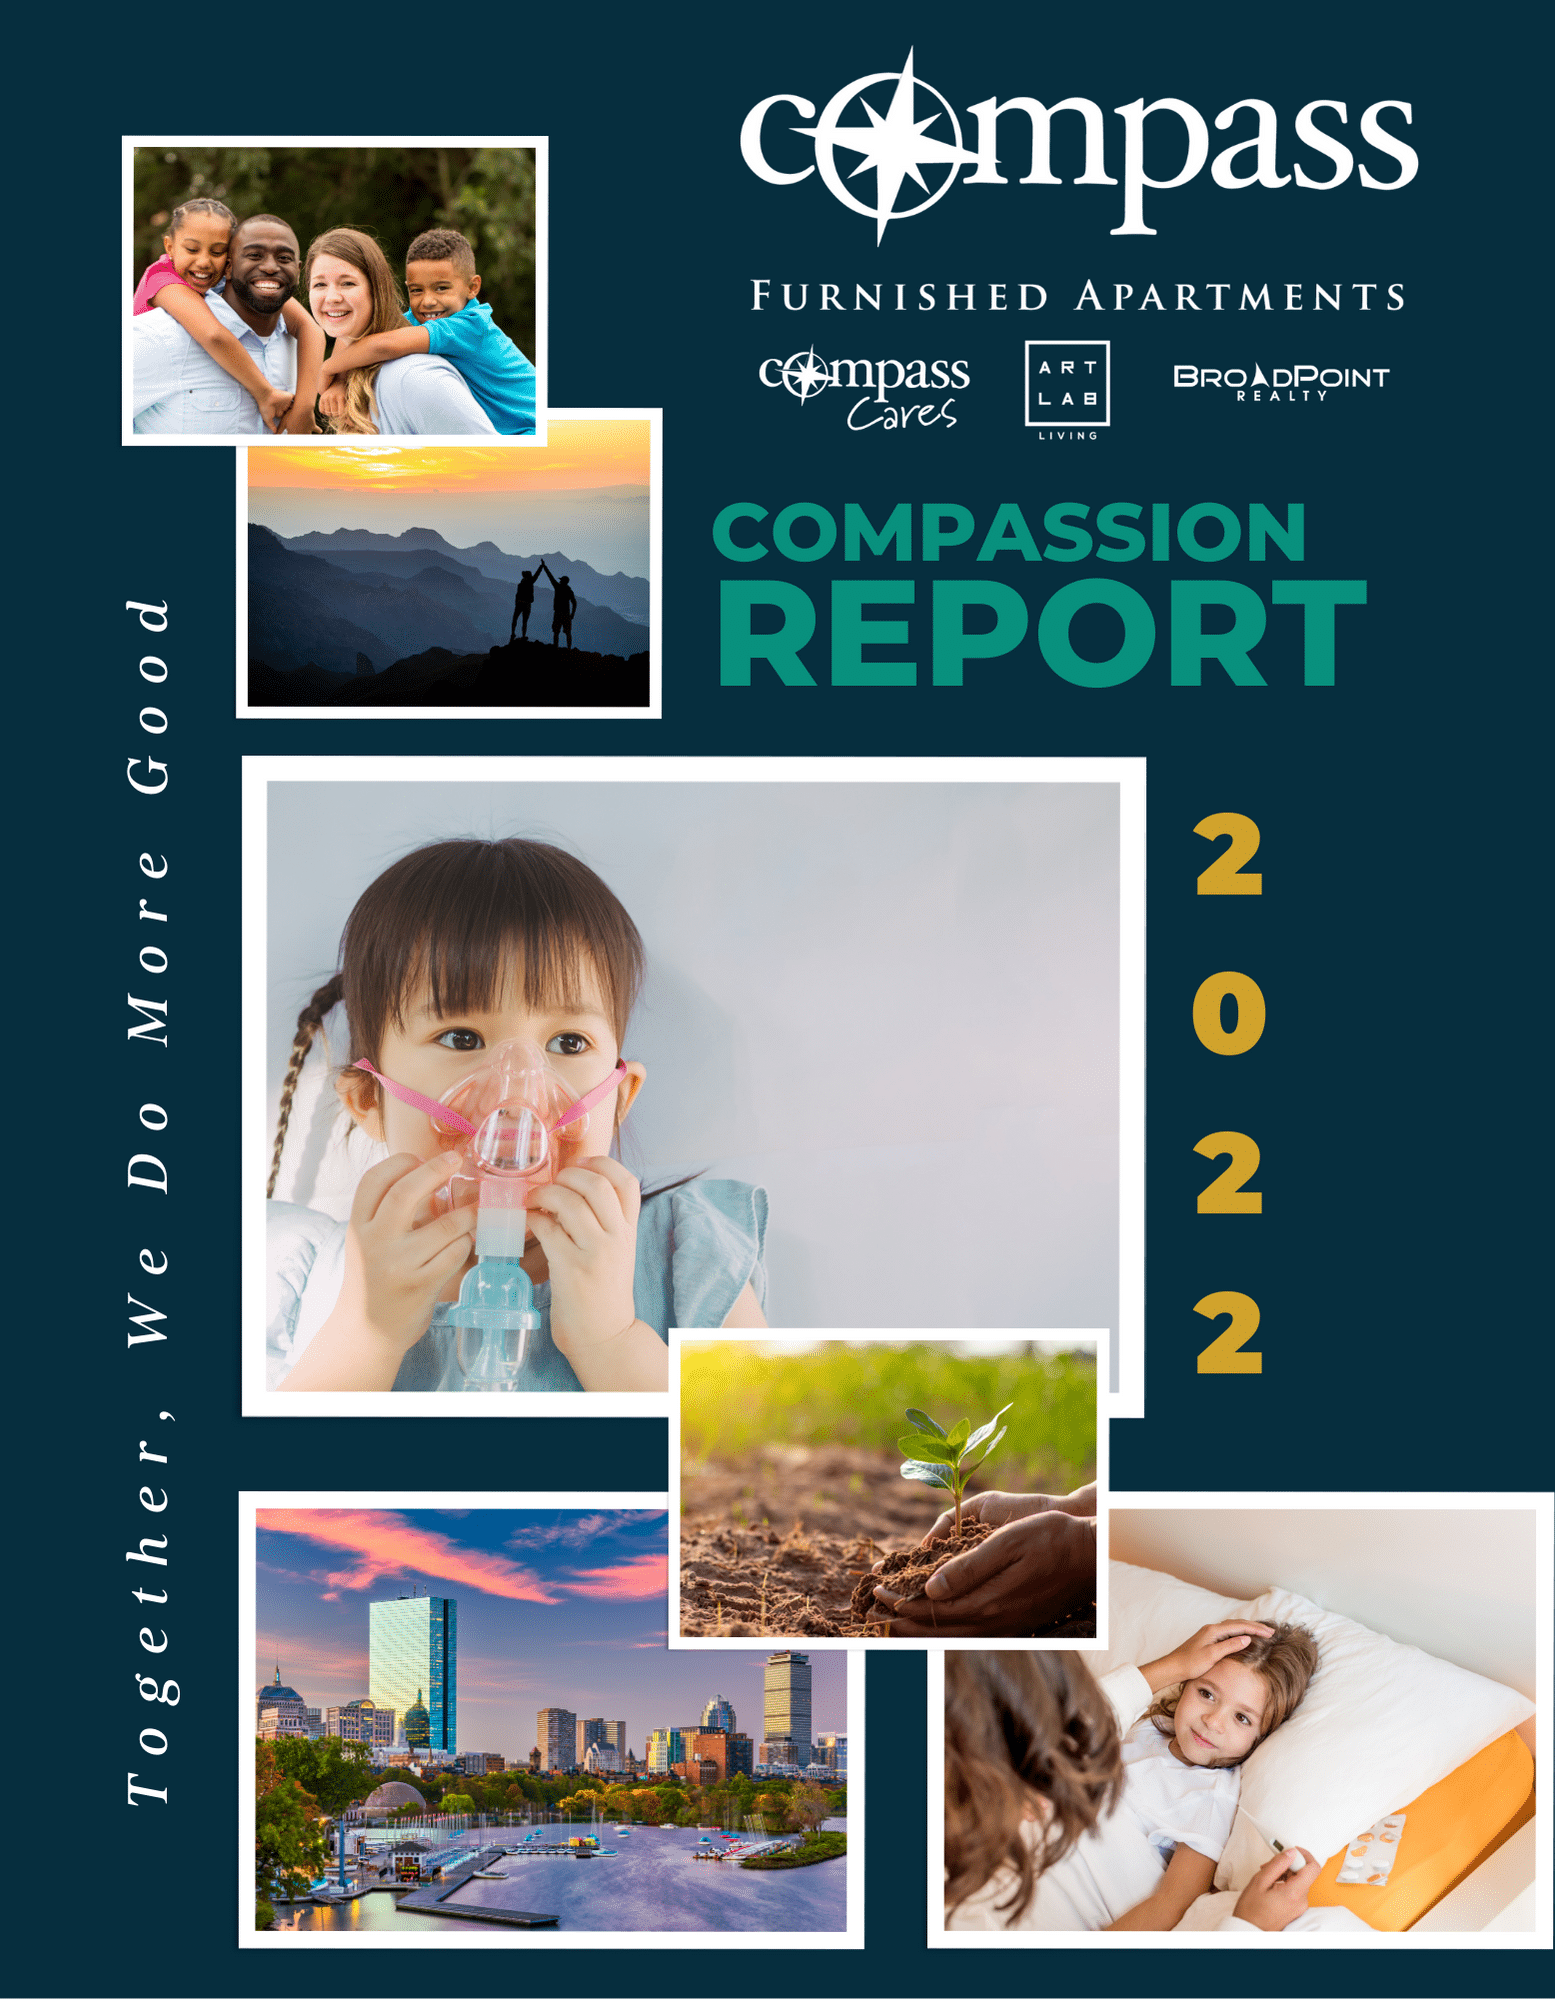 Compass Furnished Apartments Launches 2022 Compassion Report, The Impact of the Compass Cares Program